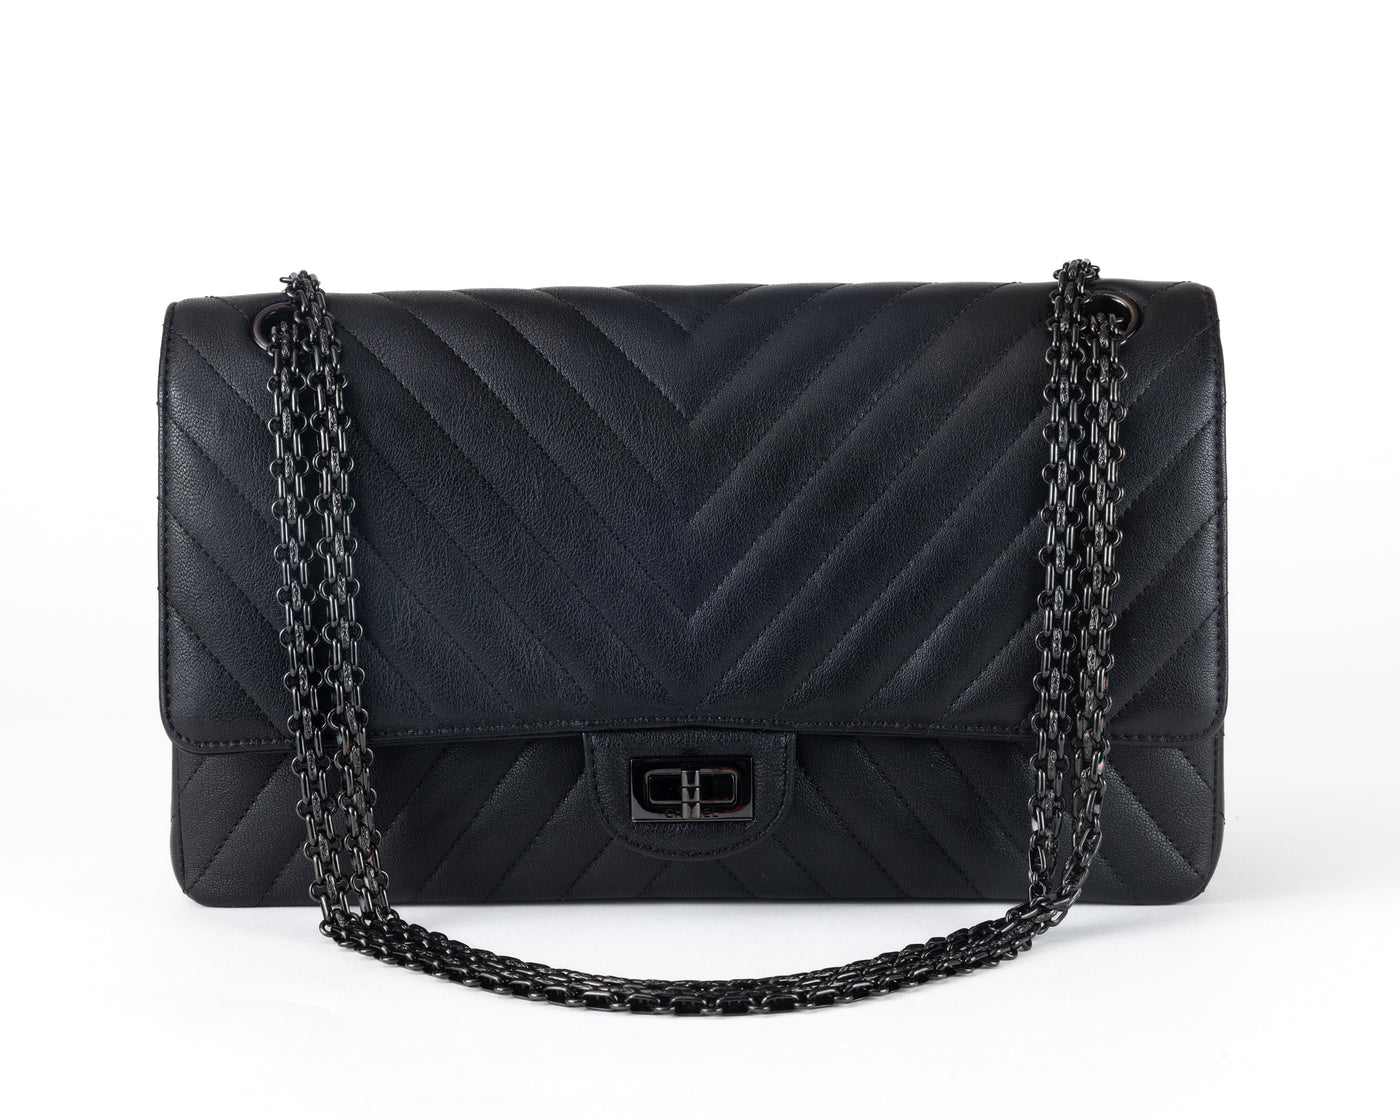 Look no further than this authentic Chanel So Black Chevron Medium Classic